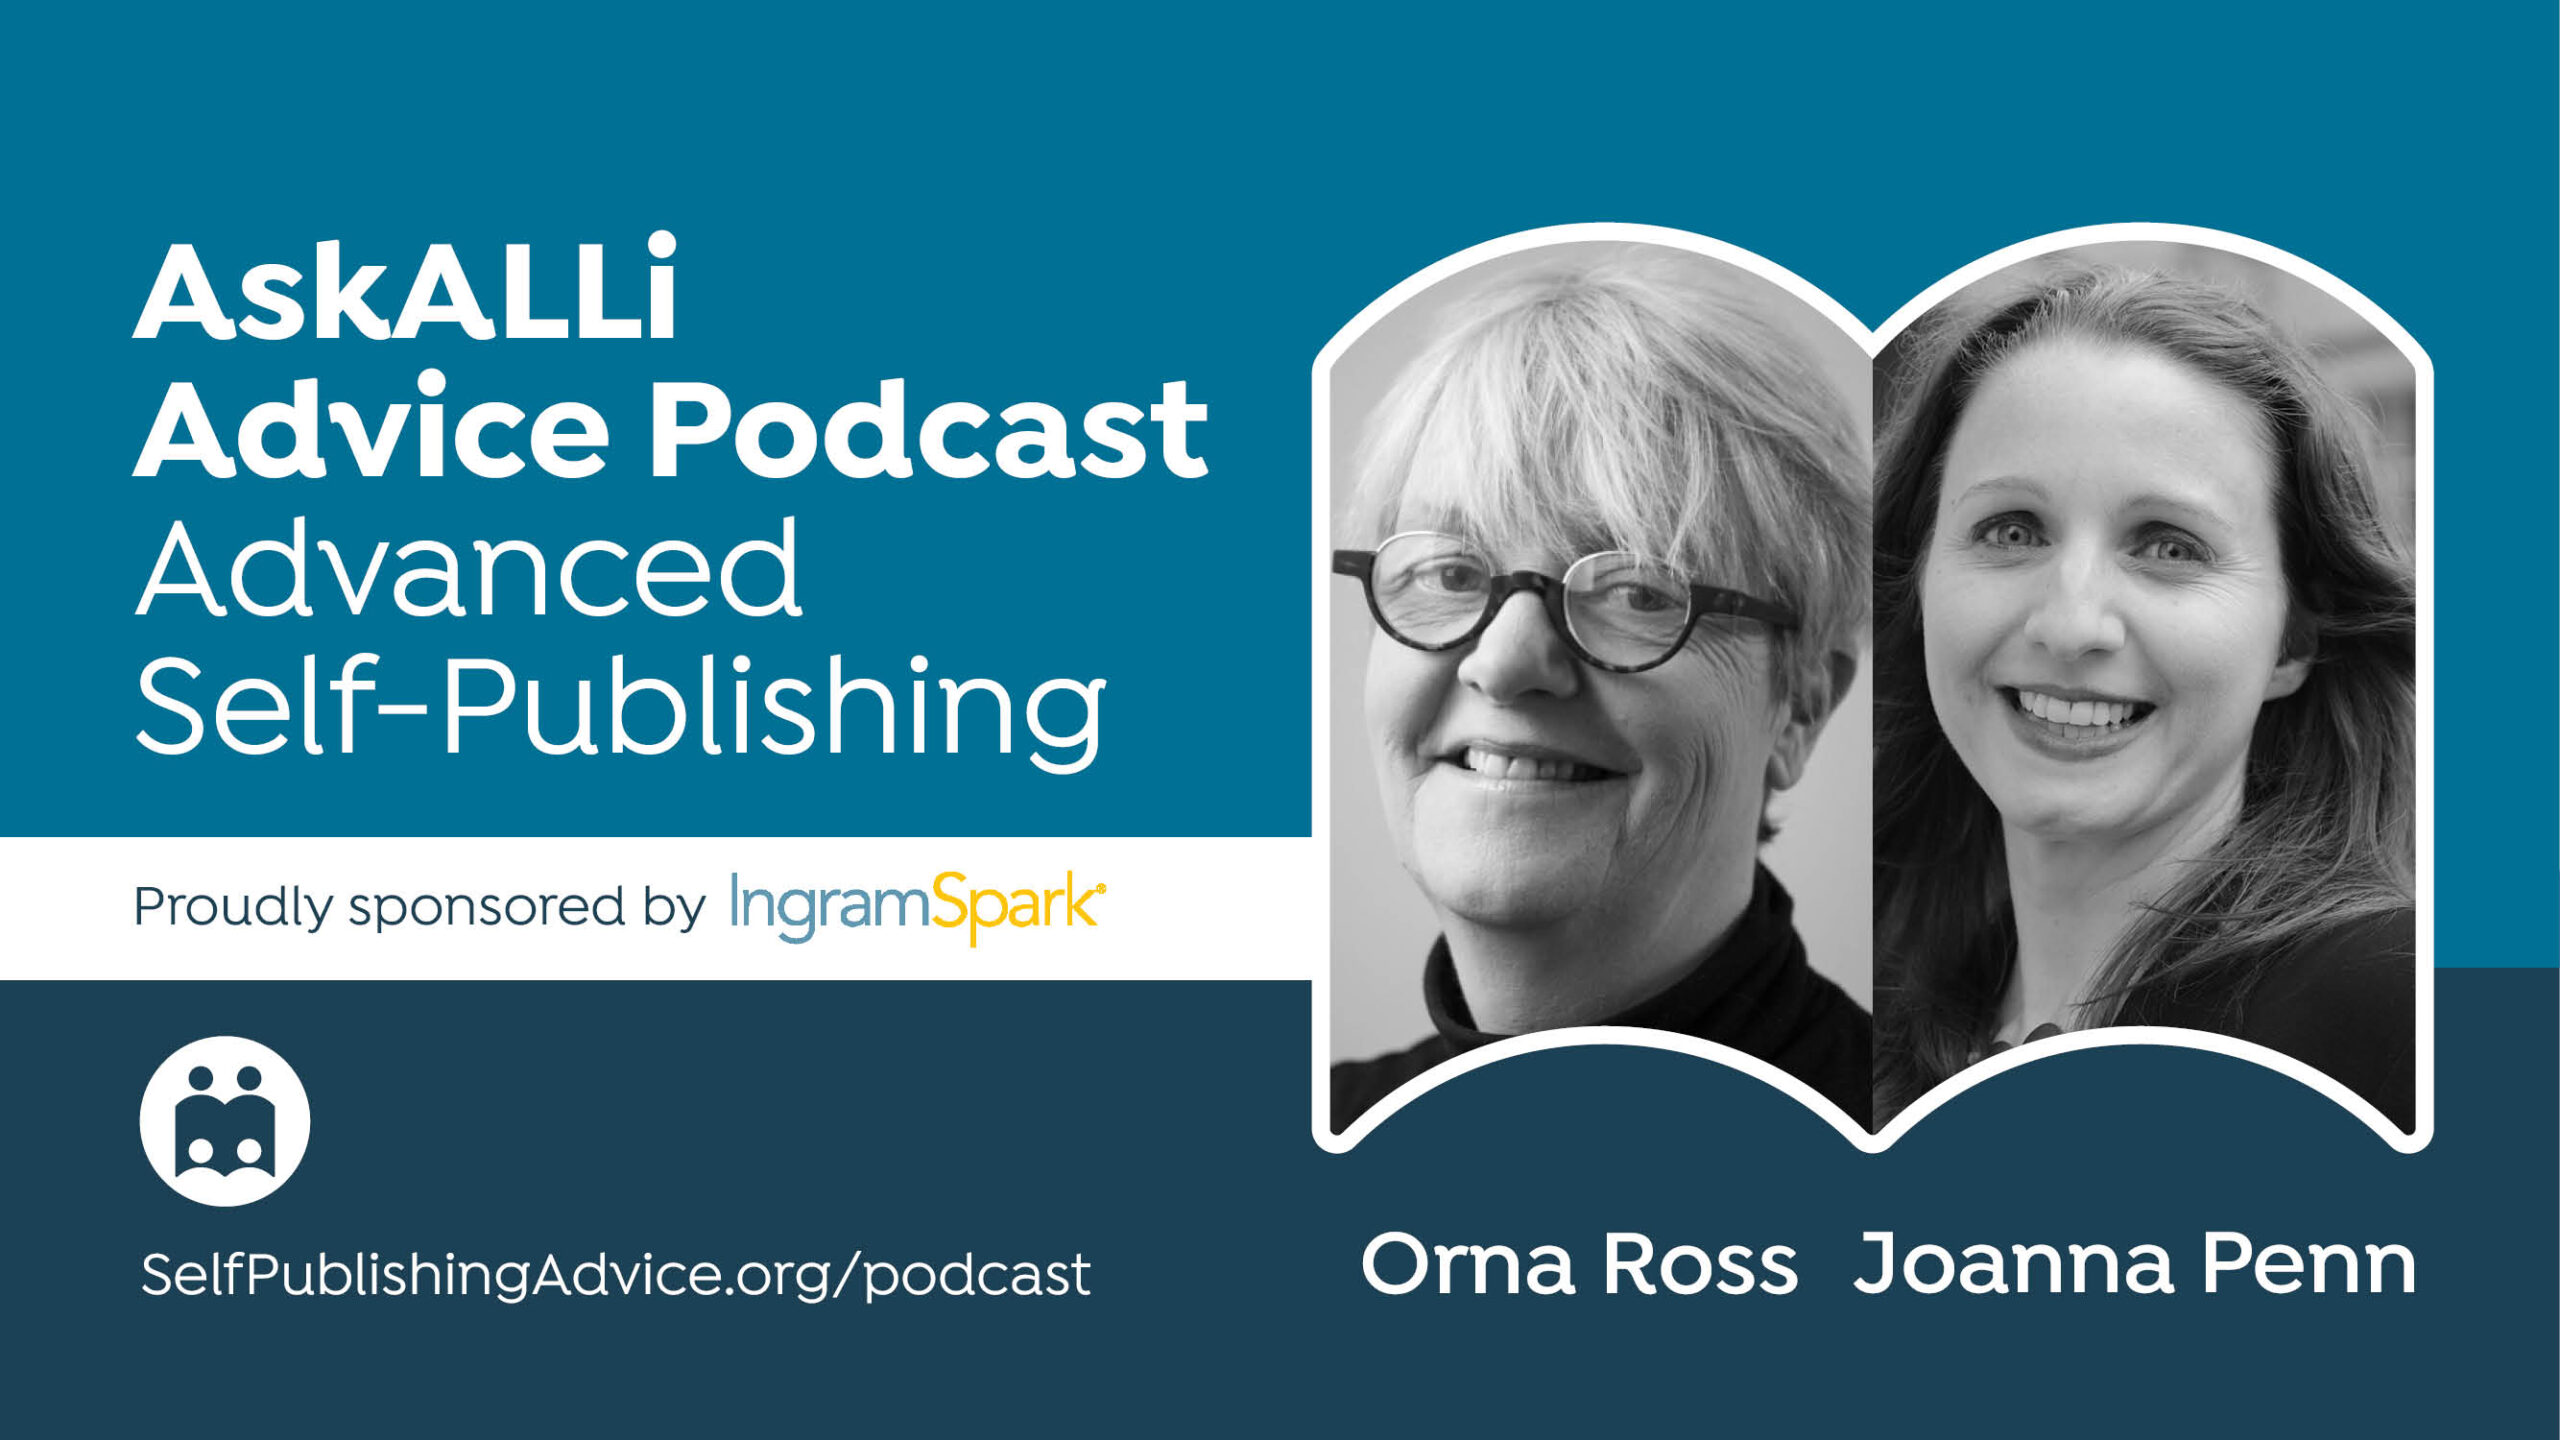 Focus On Your Strengths As An Indie Author To Beat ‘Comparison-itis:’ Advanced Self-Publishing Podcast With Orna Ross And Joanna Penn